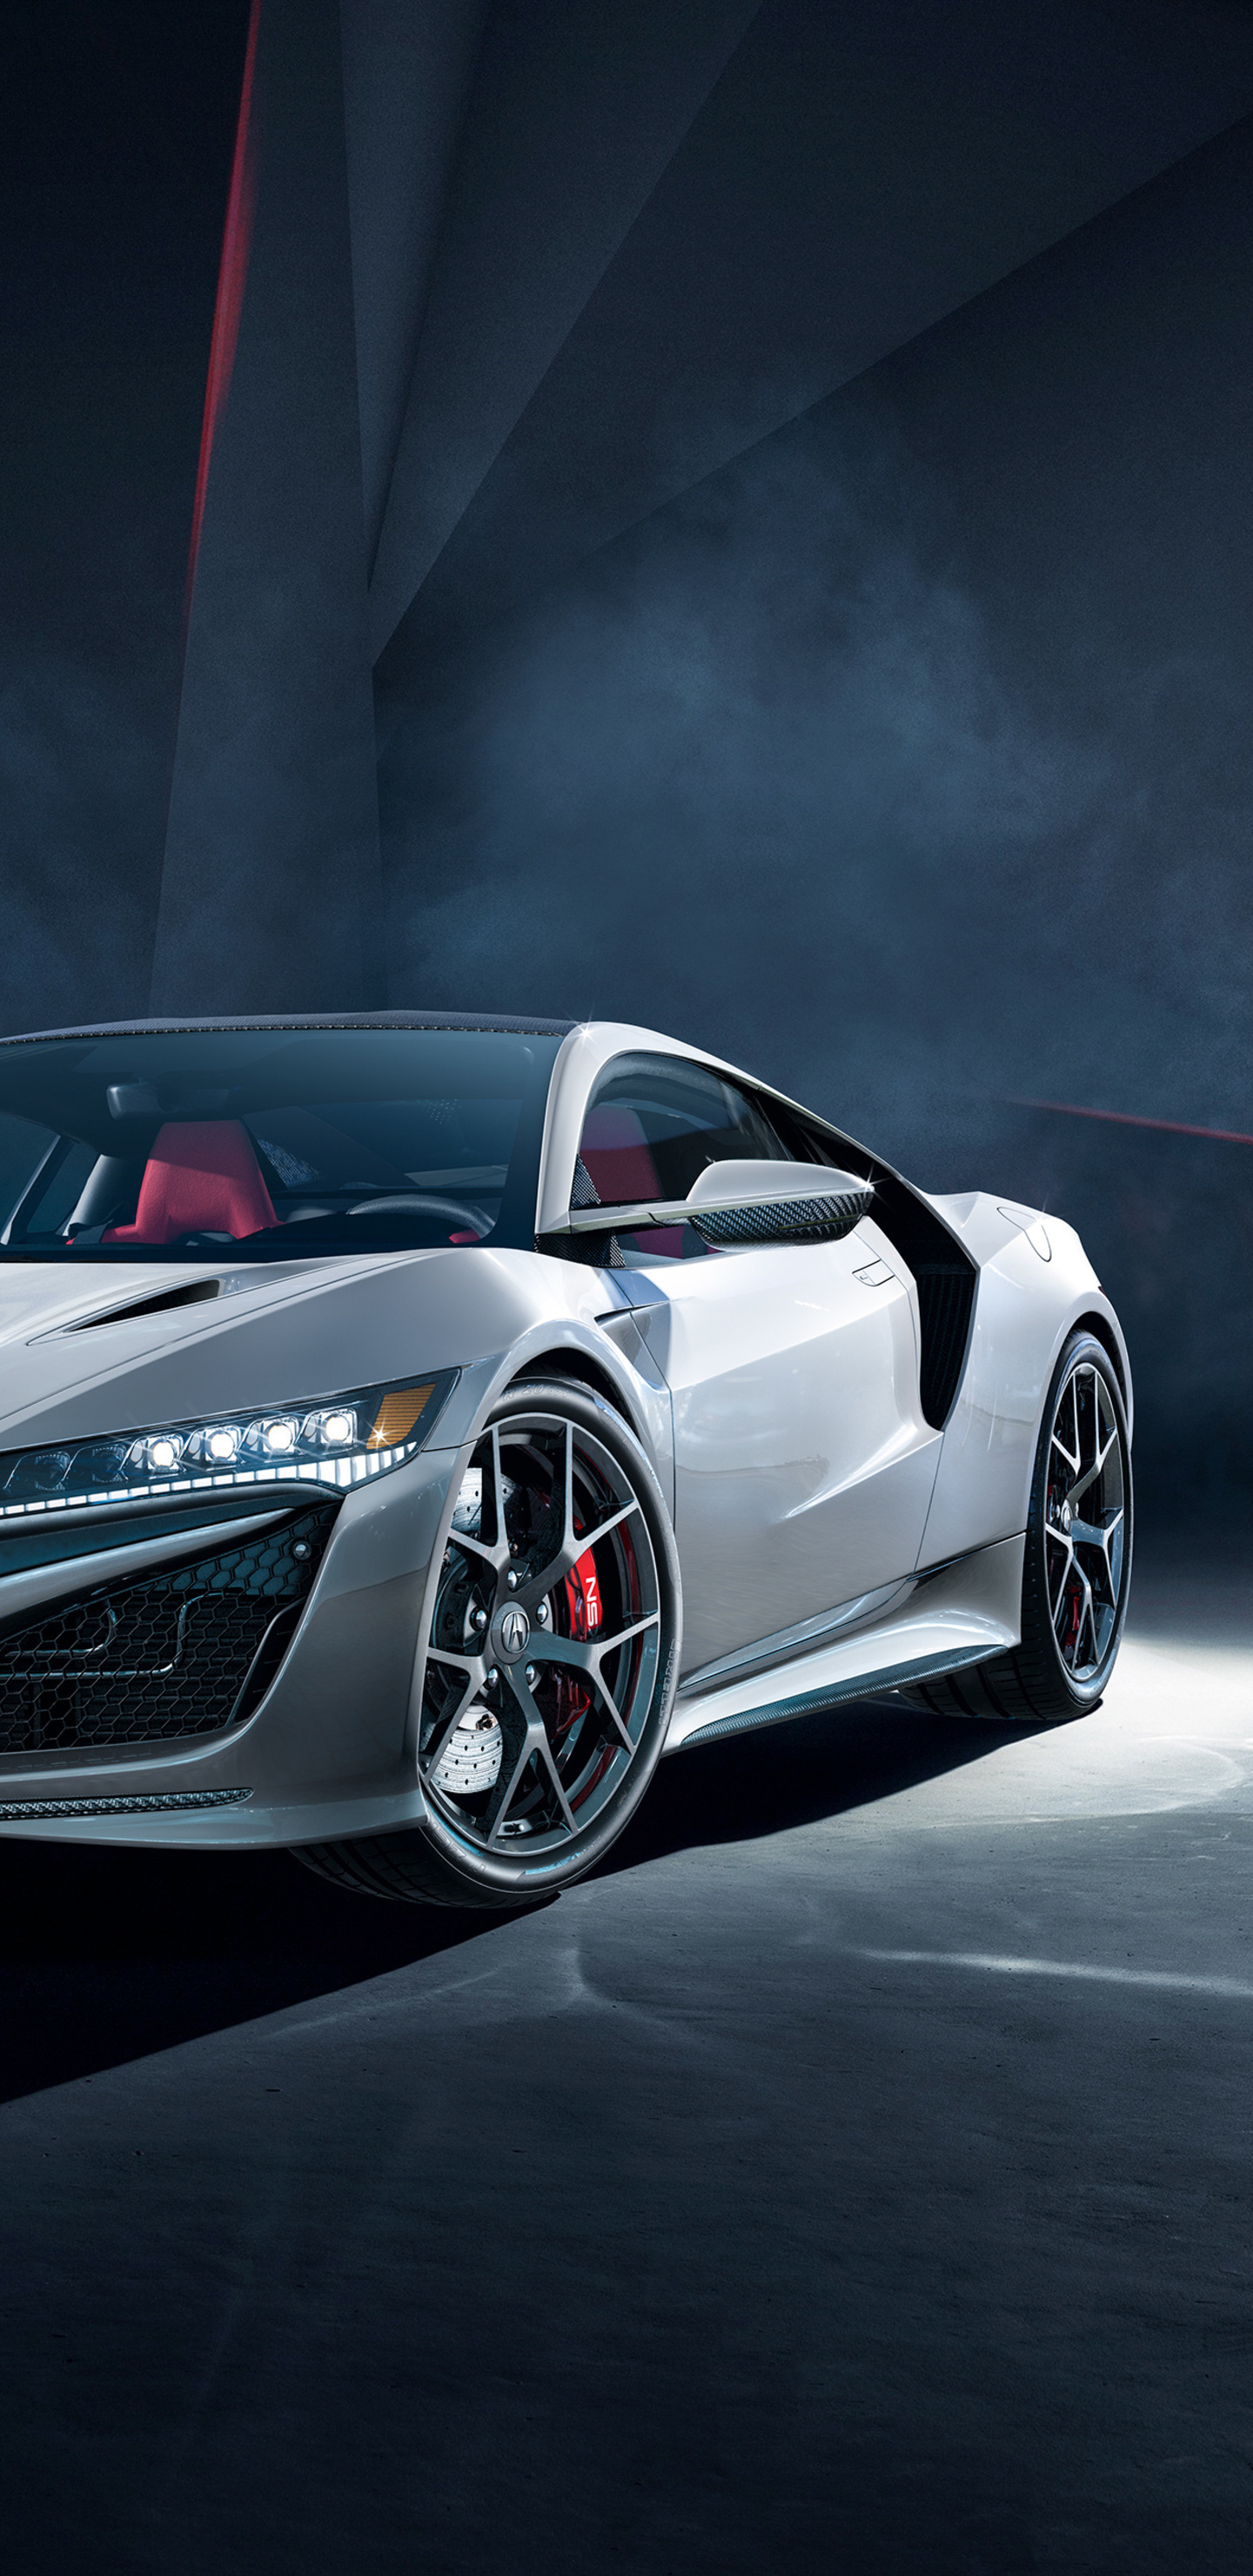 1440x2960 4k Acura Nsx Samsung Galaxy Note 9 8 S9 S8 S8 Qhd Hd 4k Wallpapers Images Backgrounds Photos And Pictures